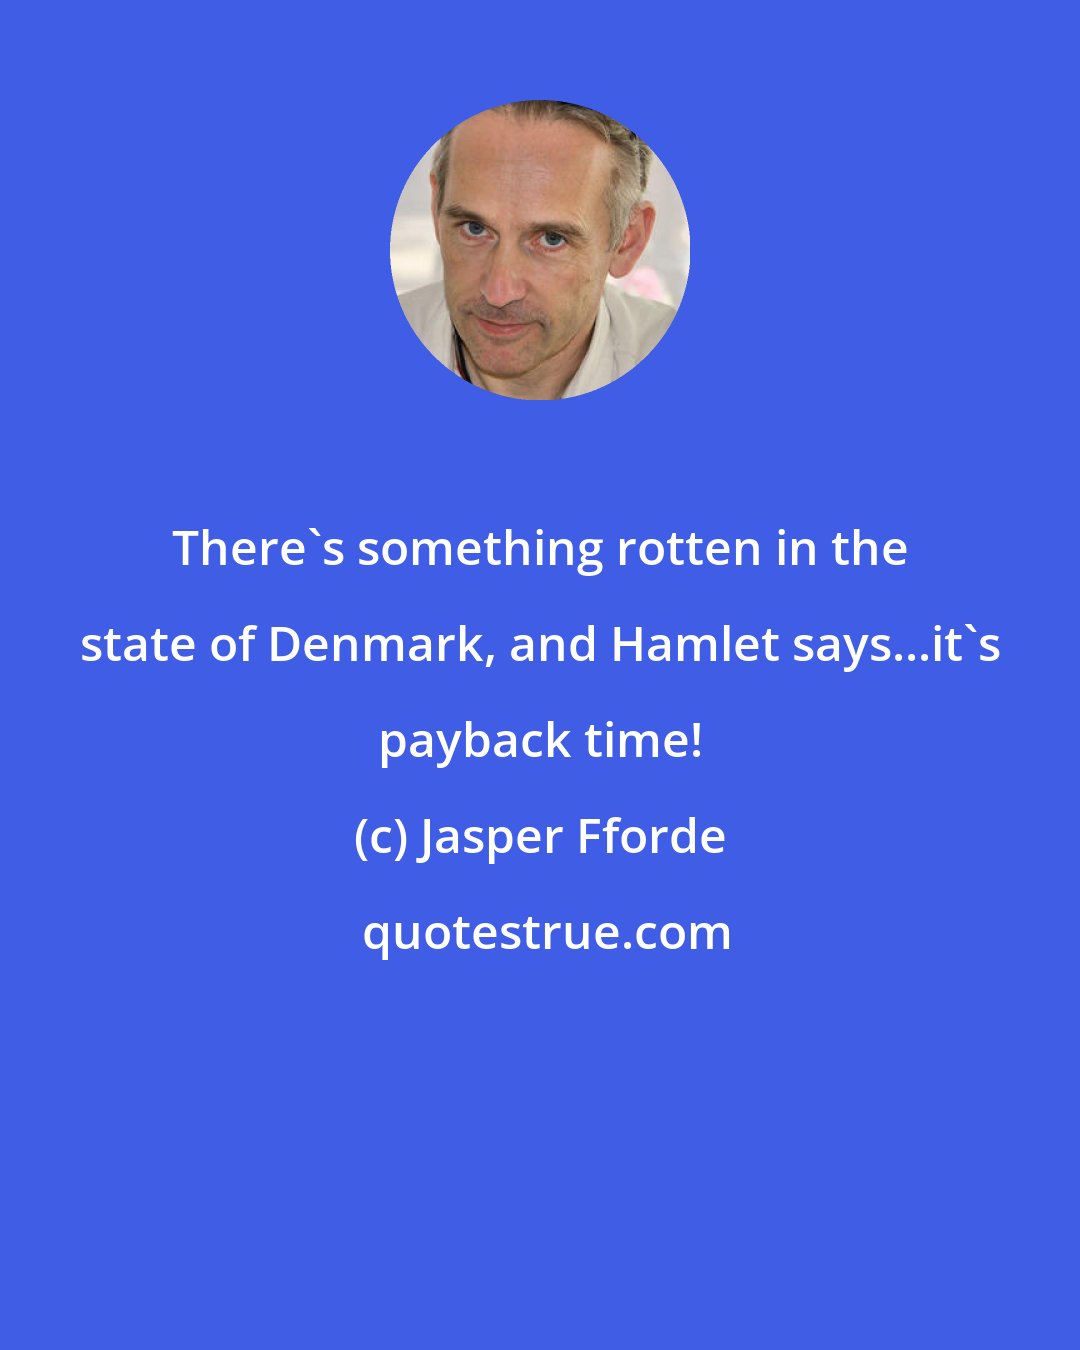 Jasper Fforde: There's something rotten in the state of Denmark, and Hamlet says...it's payback time!